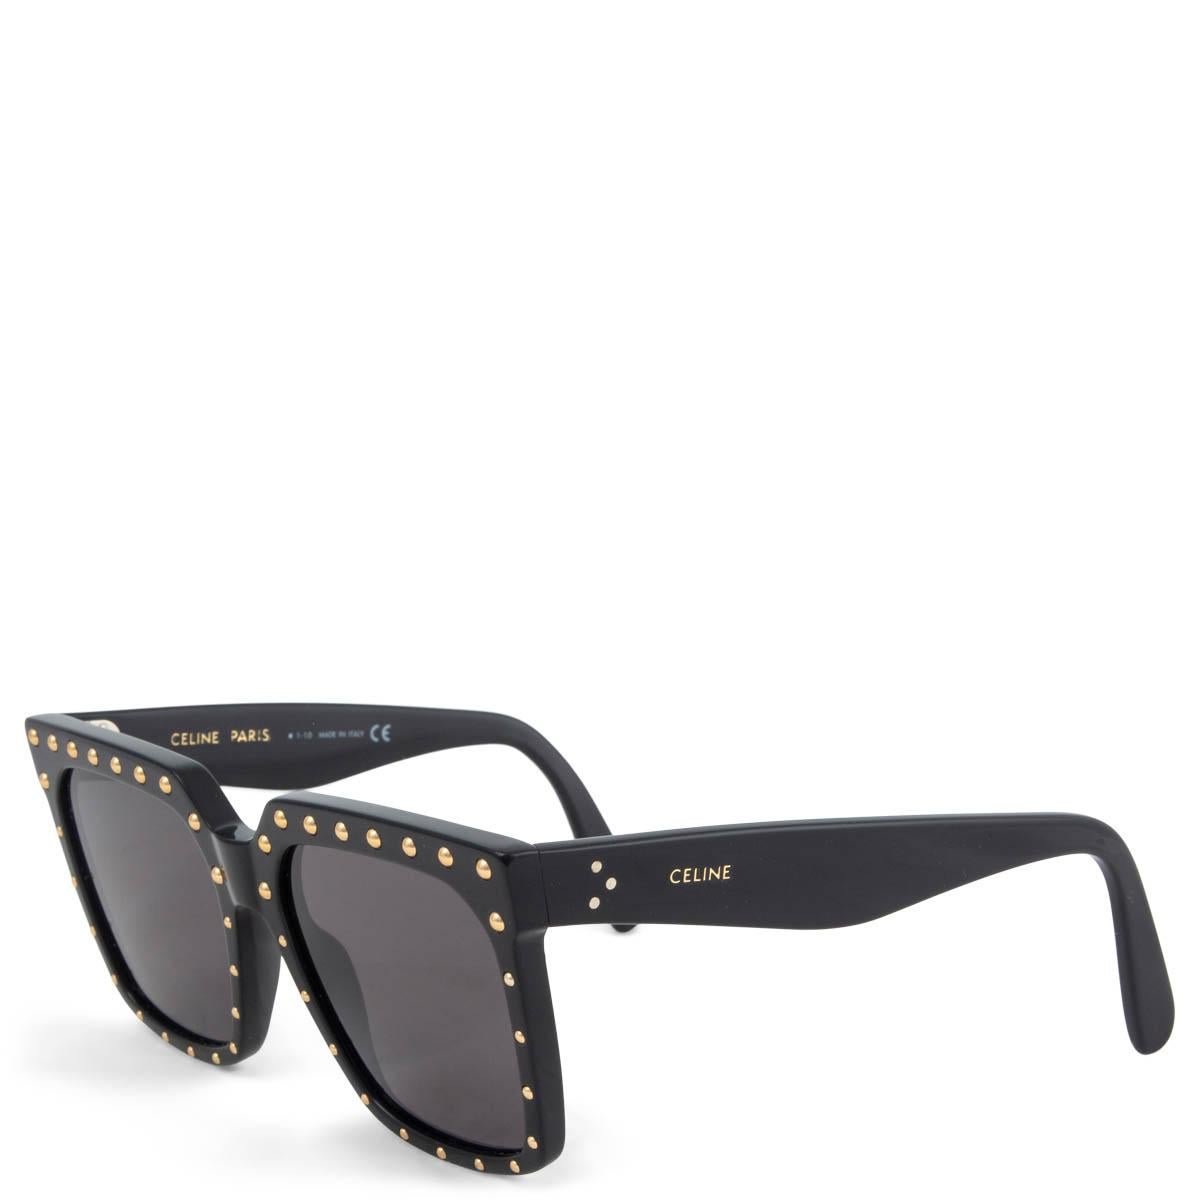 100% authentic Celine CL4055IS geometric black acetate sunglasses with grey lenses. Embellished with gold-tone studds around the frame. Have been worn and are in excellent condition. Come with soft case. 

Measurements
Model	CL4055IS
Width	14cm